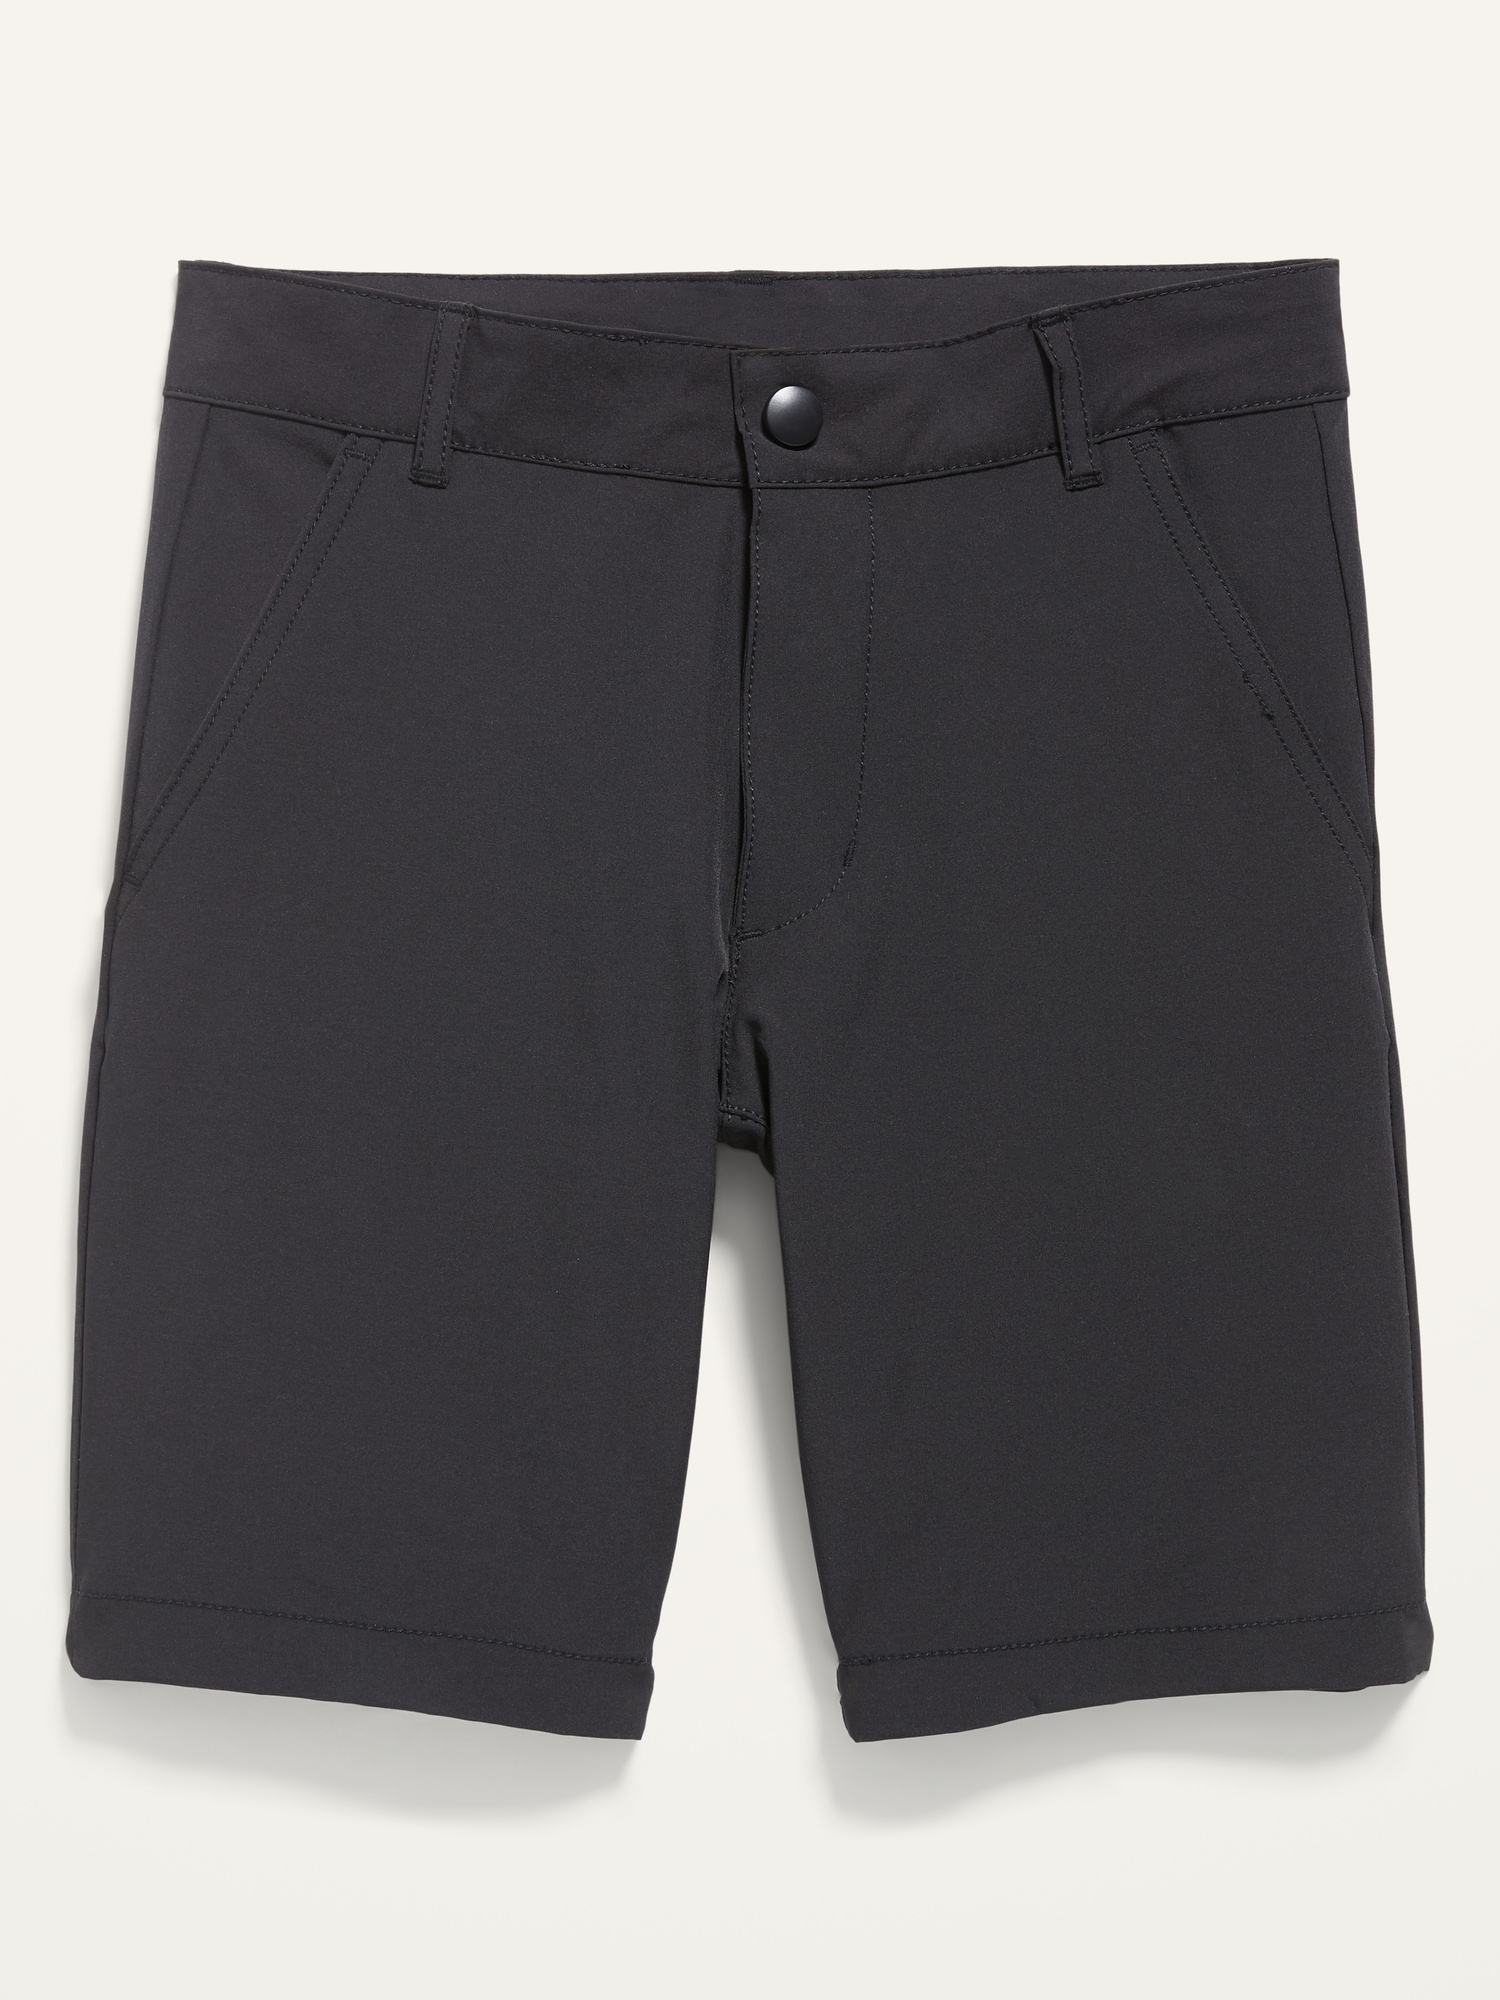 Dry-Quick Tech Flat-Front Shorts for Boys